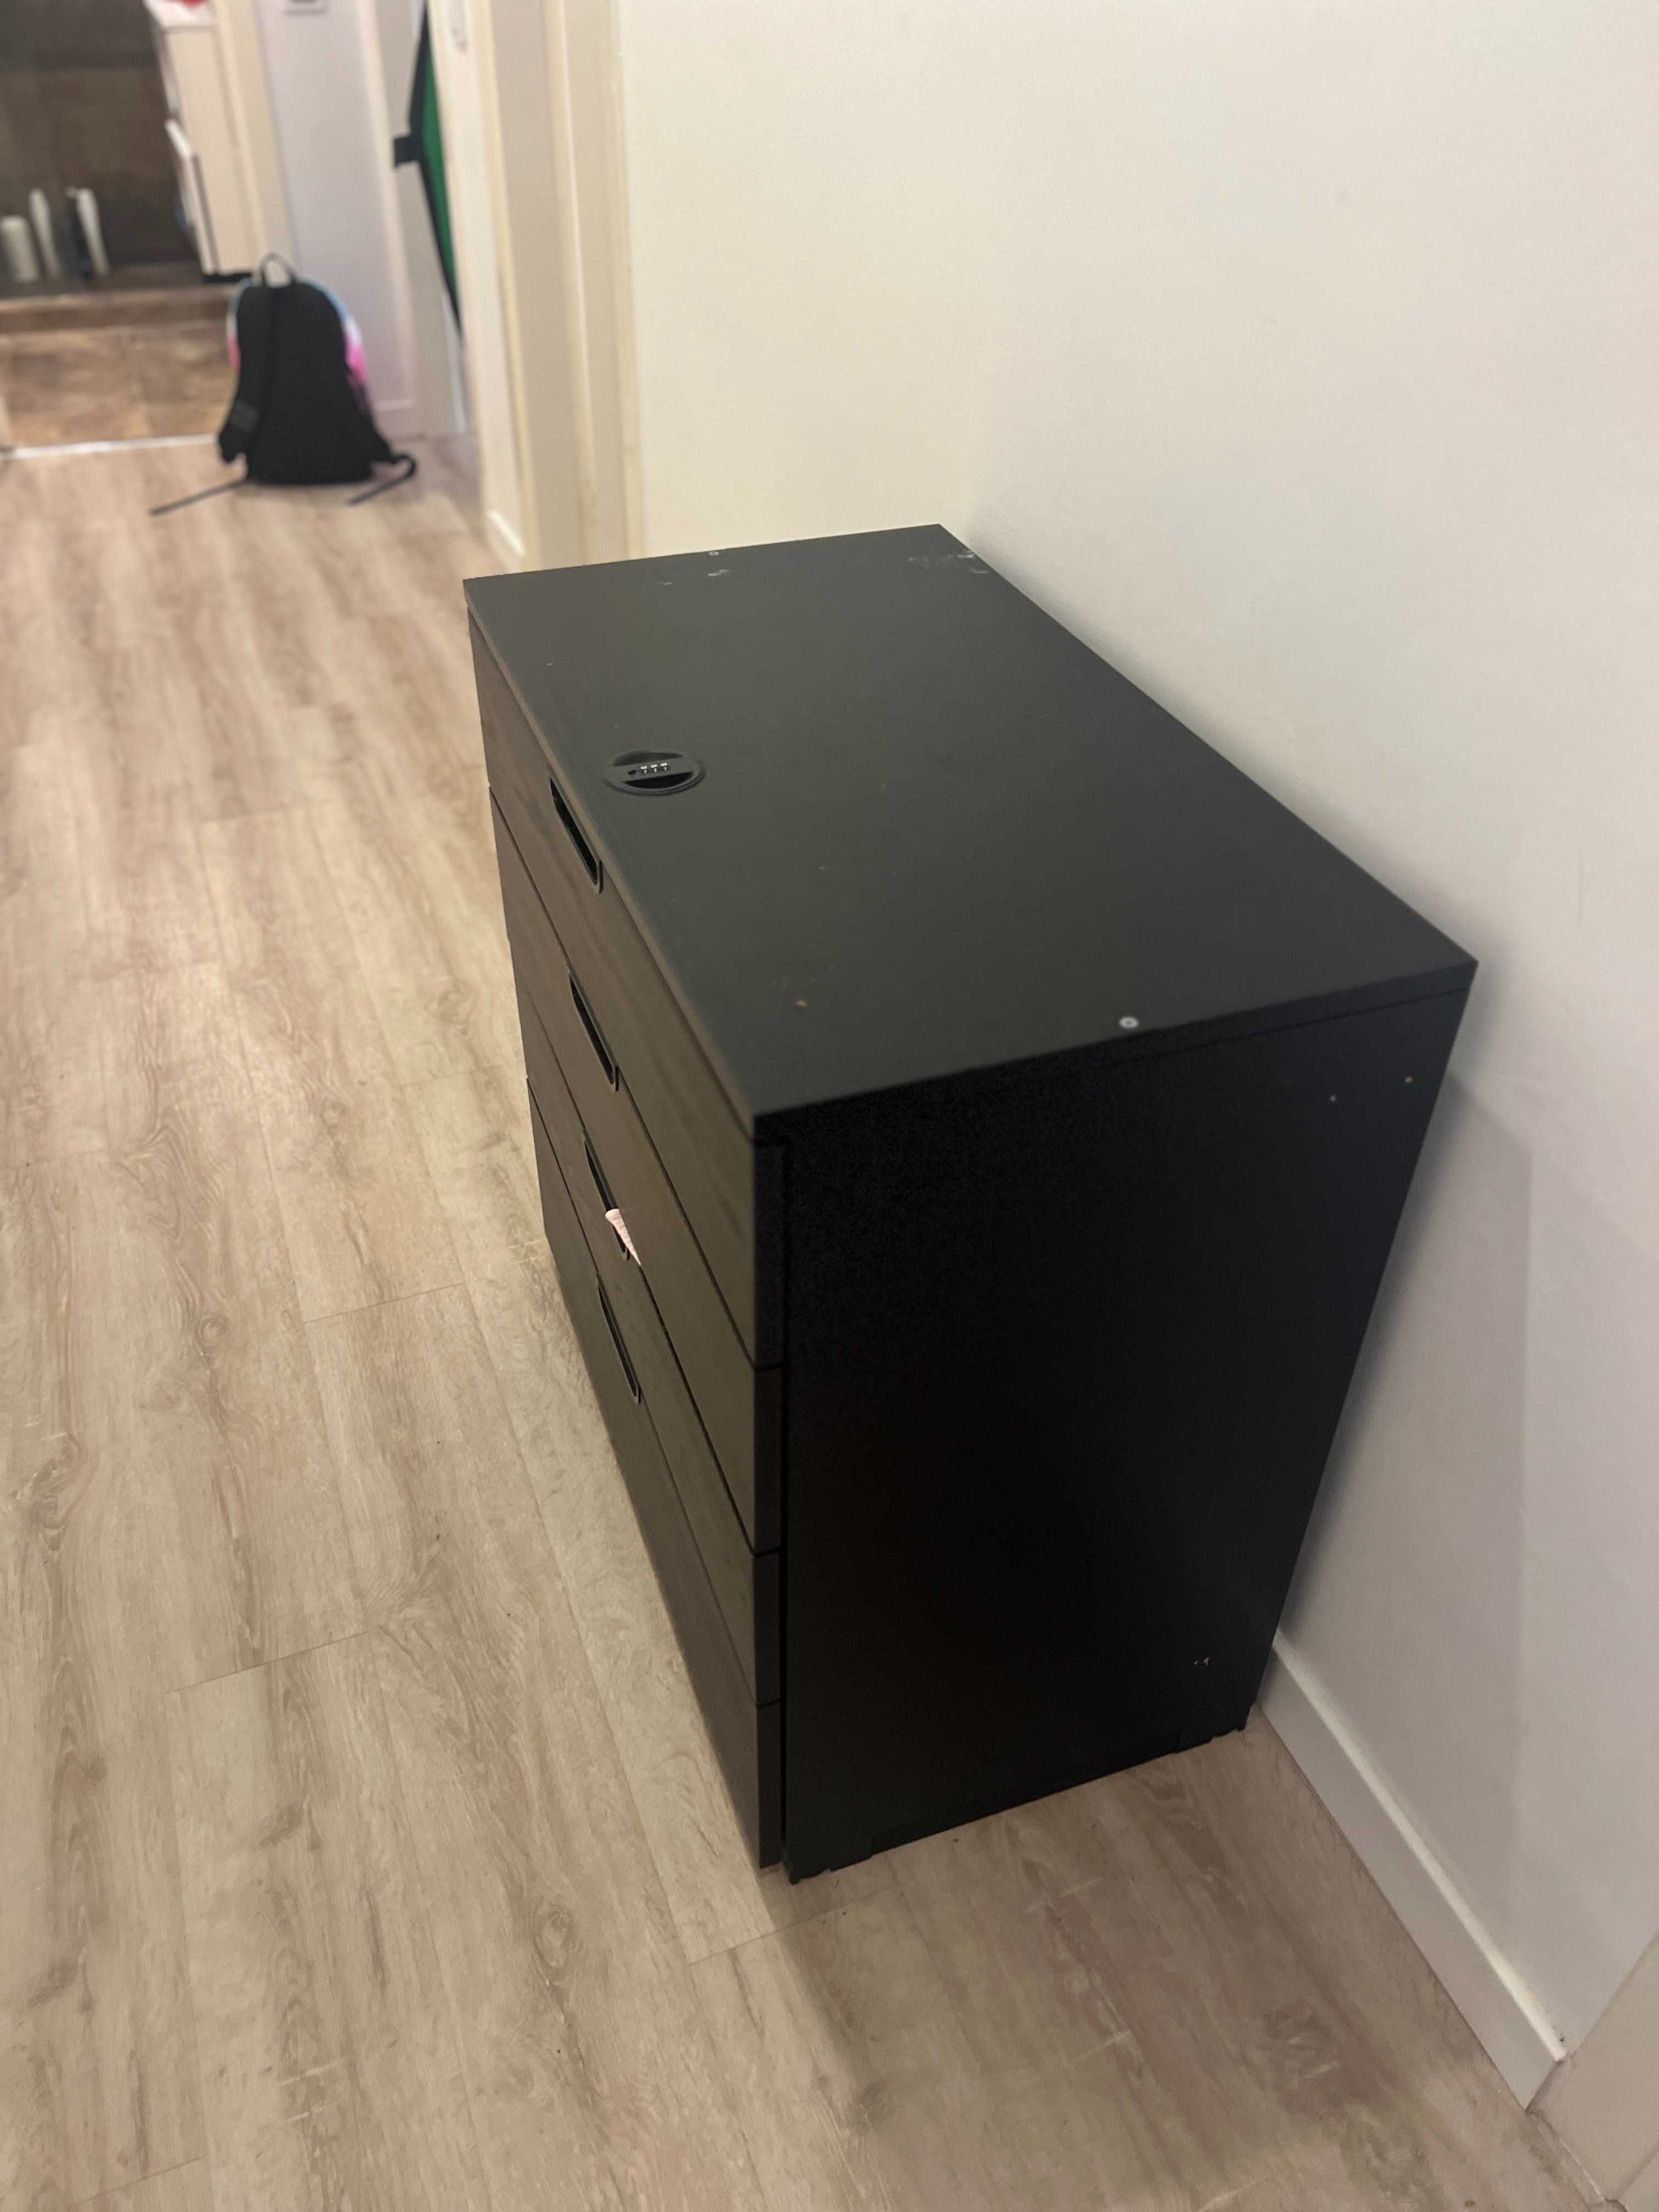 Lockable Draws for the Office or Home Office